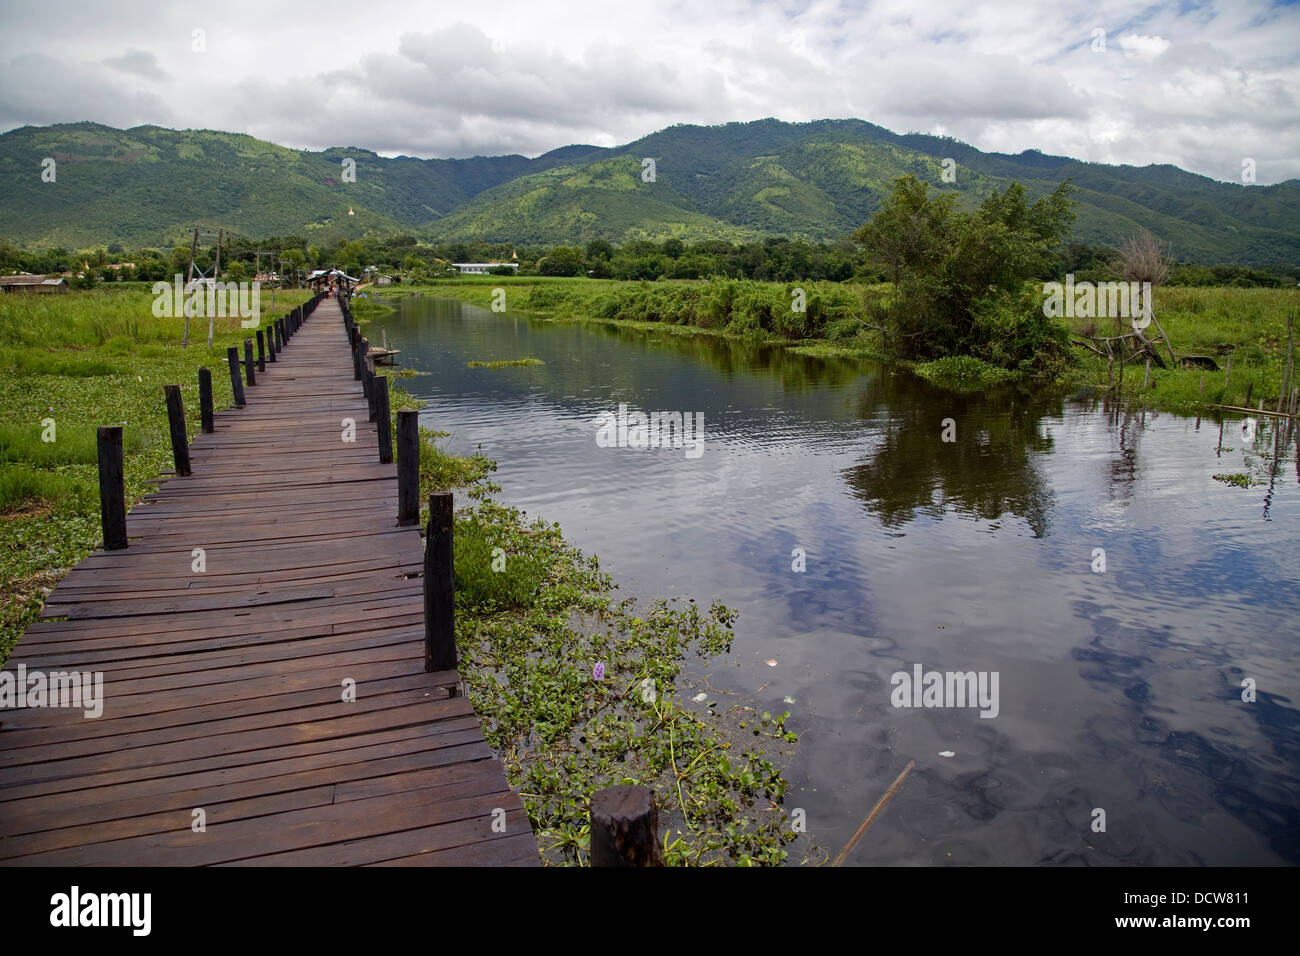 View of one of Inle Lake's canals, Myanmar (Burma) Stock Photo